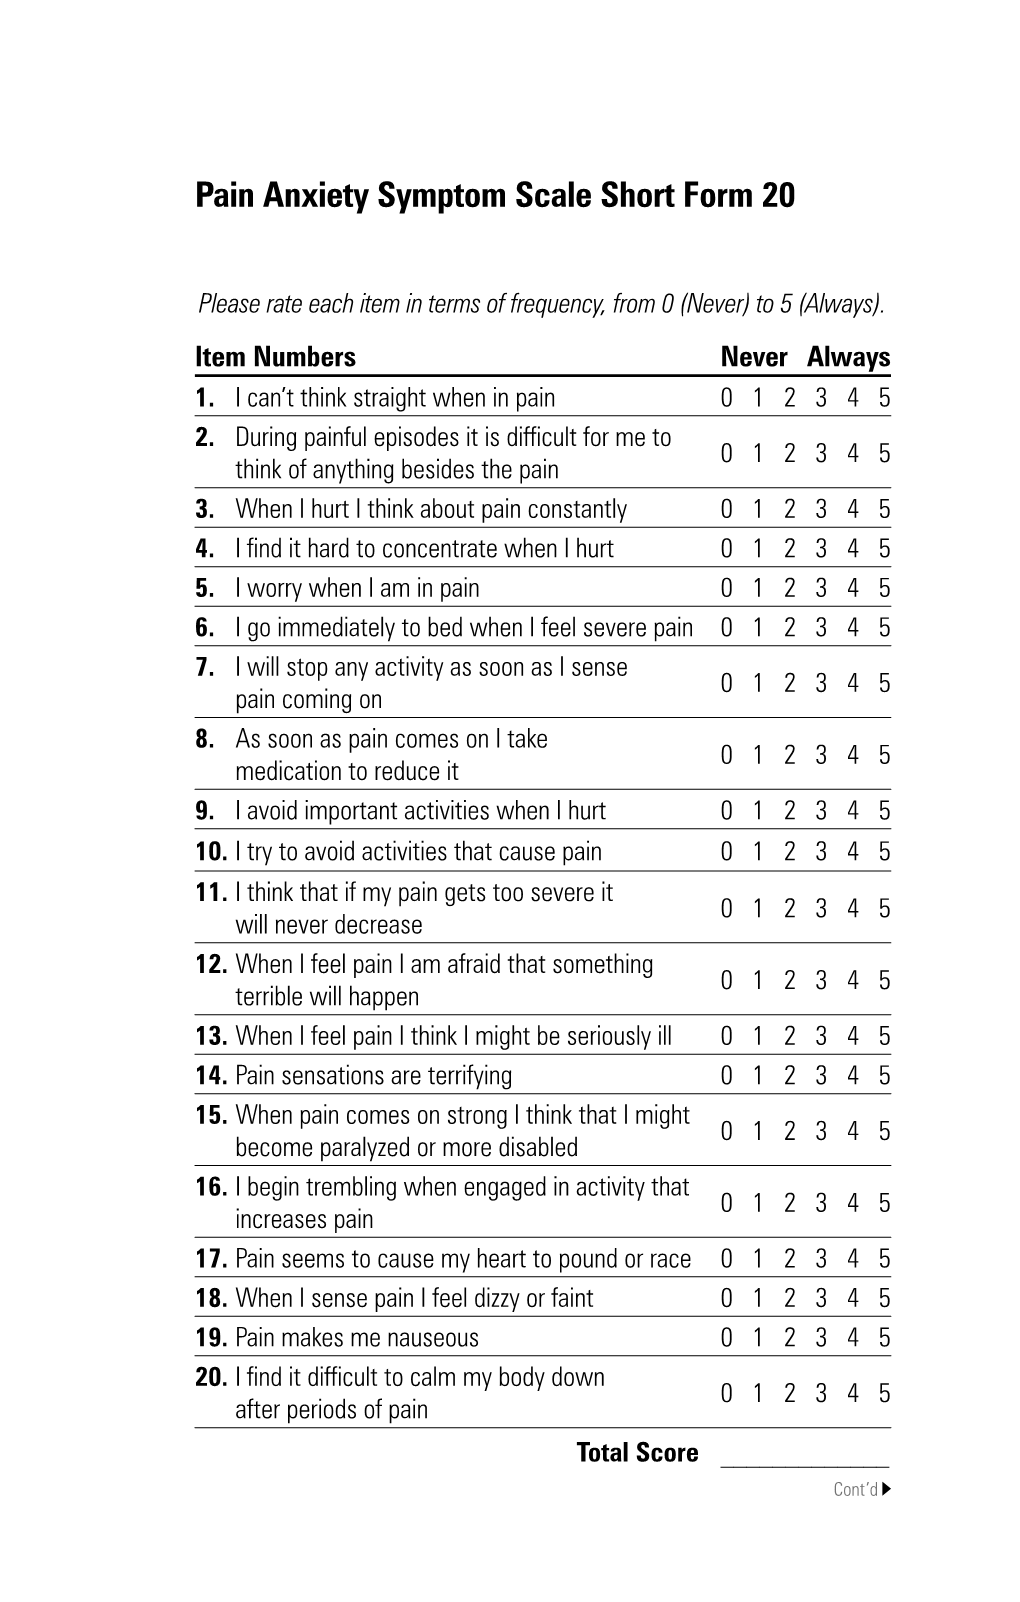 Pain Anxiety Symptom Scale Short Form 20